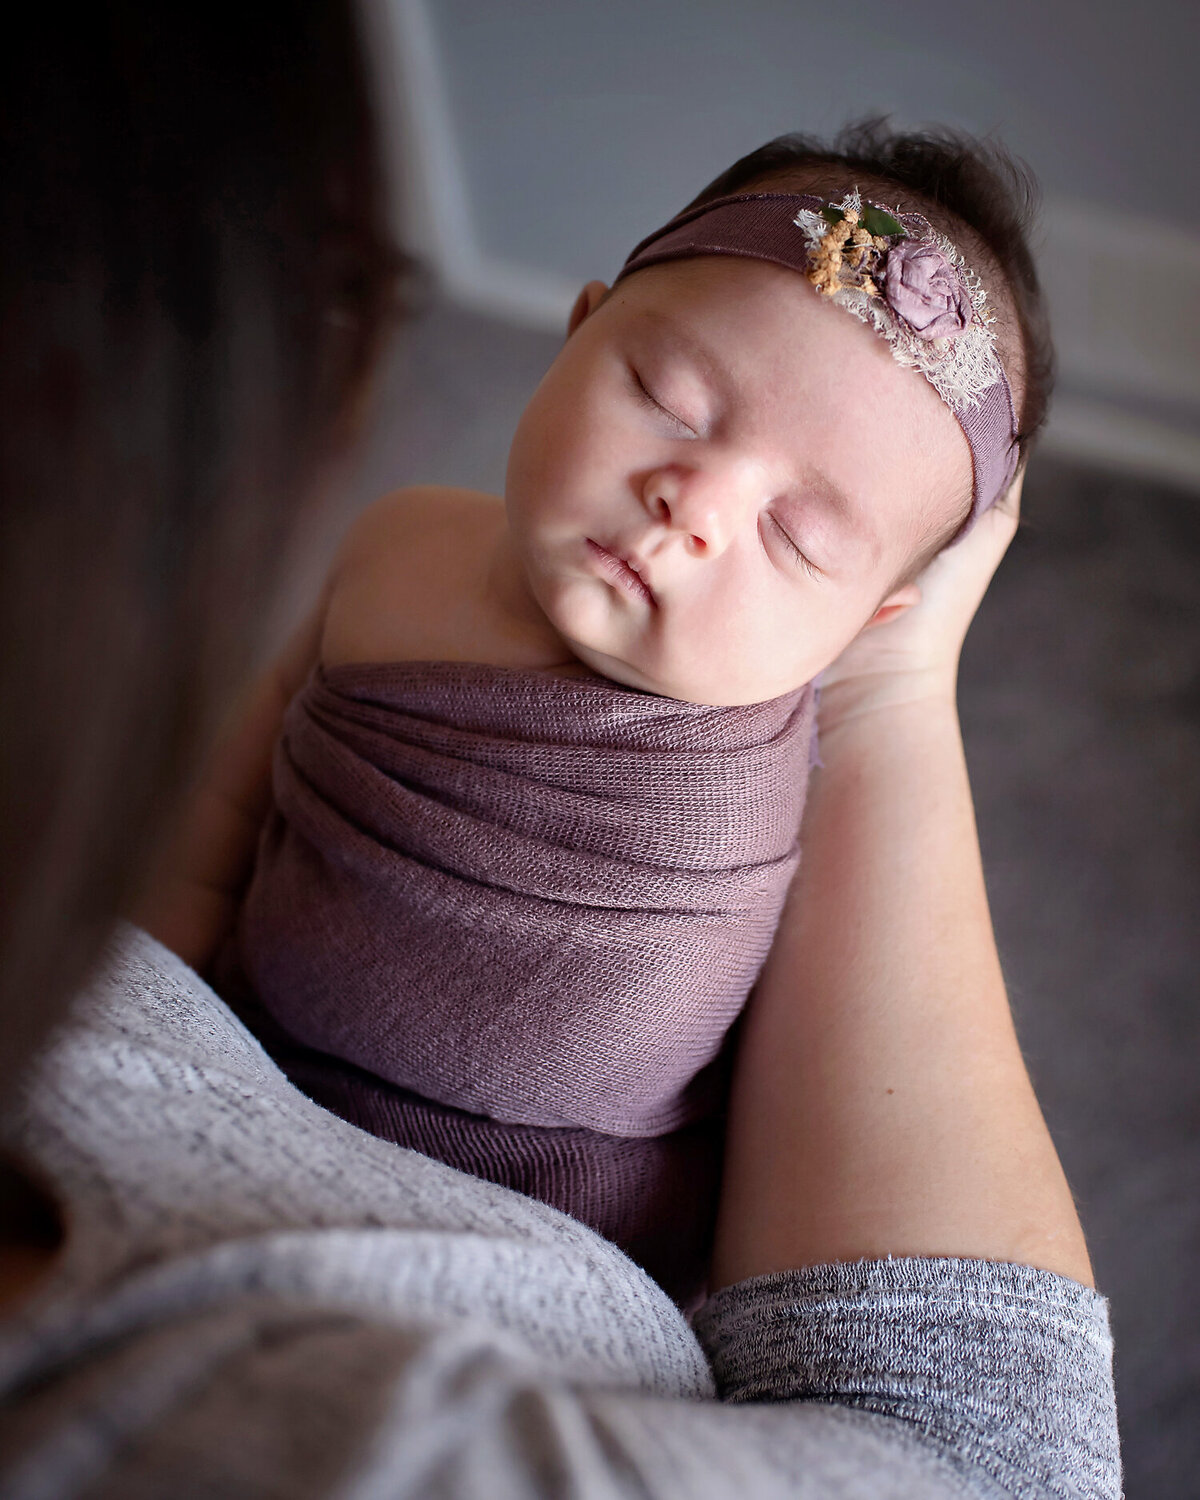 Beautiful newborn girl in a purple wrap and matching headband, sleeping in her mother's arms.